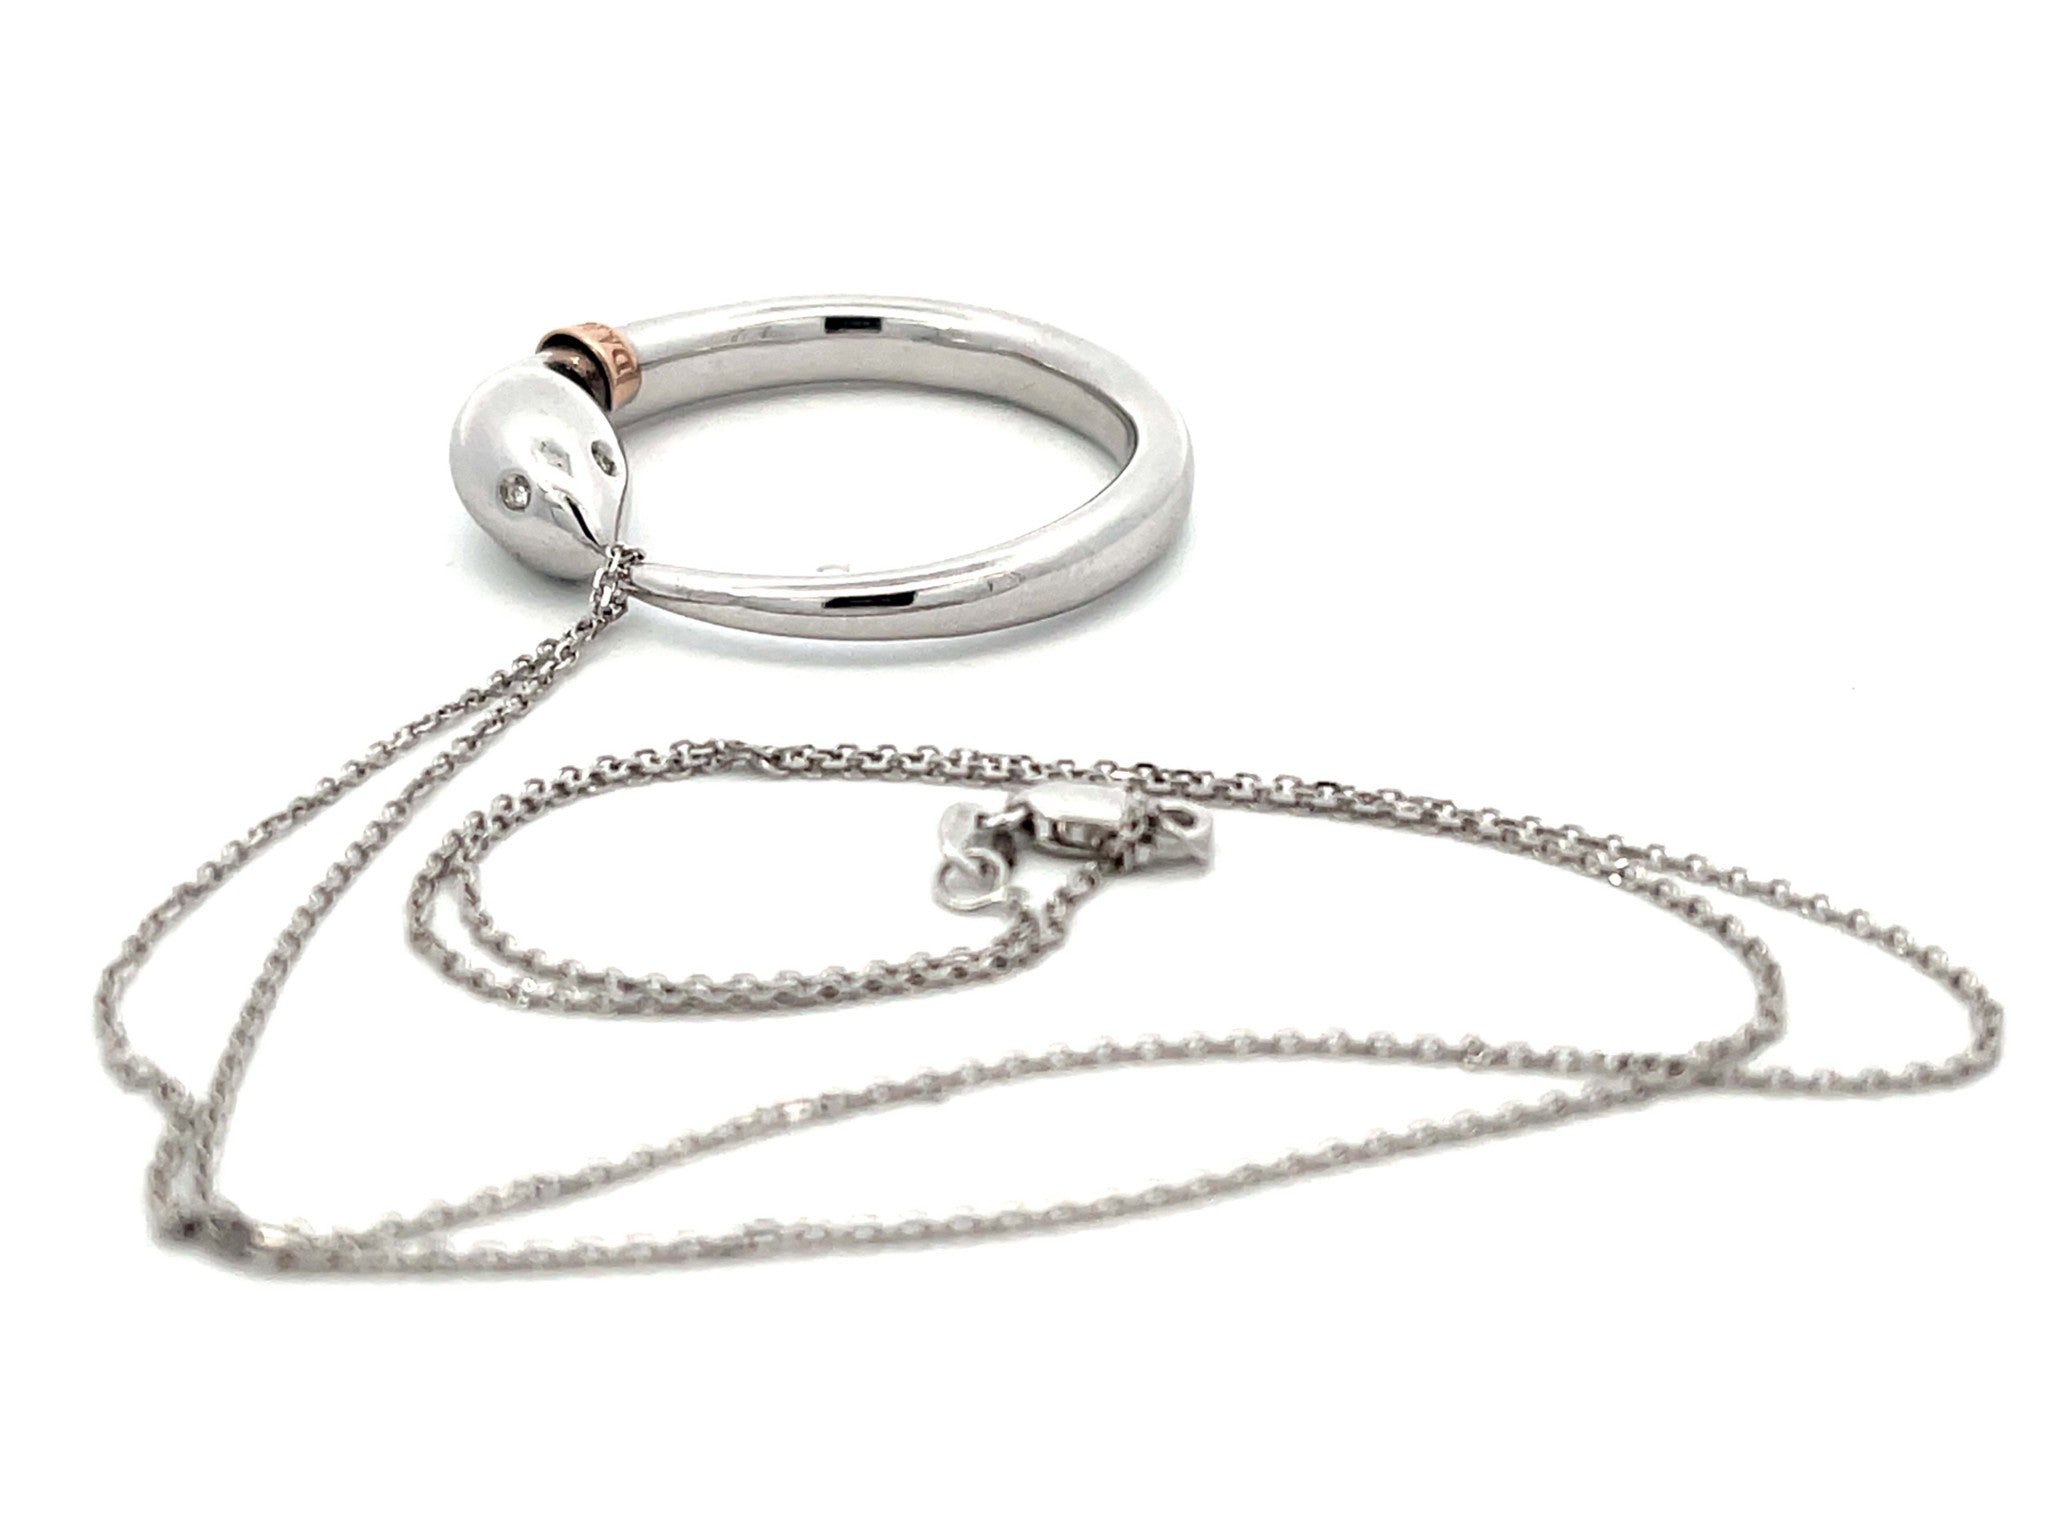 Damiani Infinito Snake Pendant Necklace in 18k White Gold